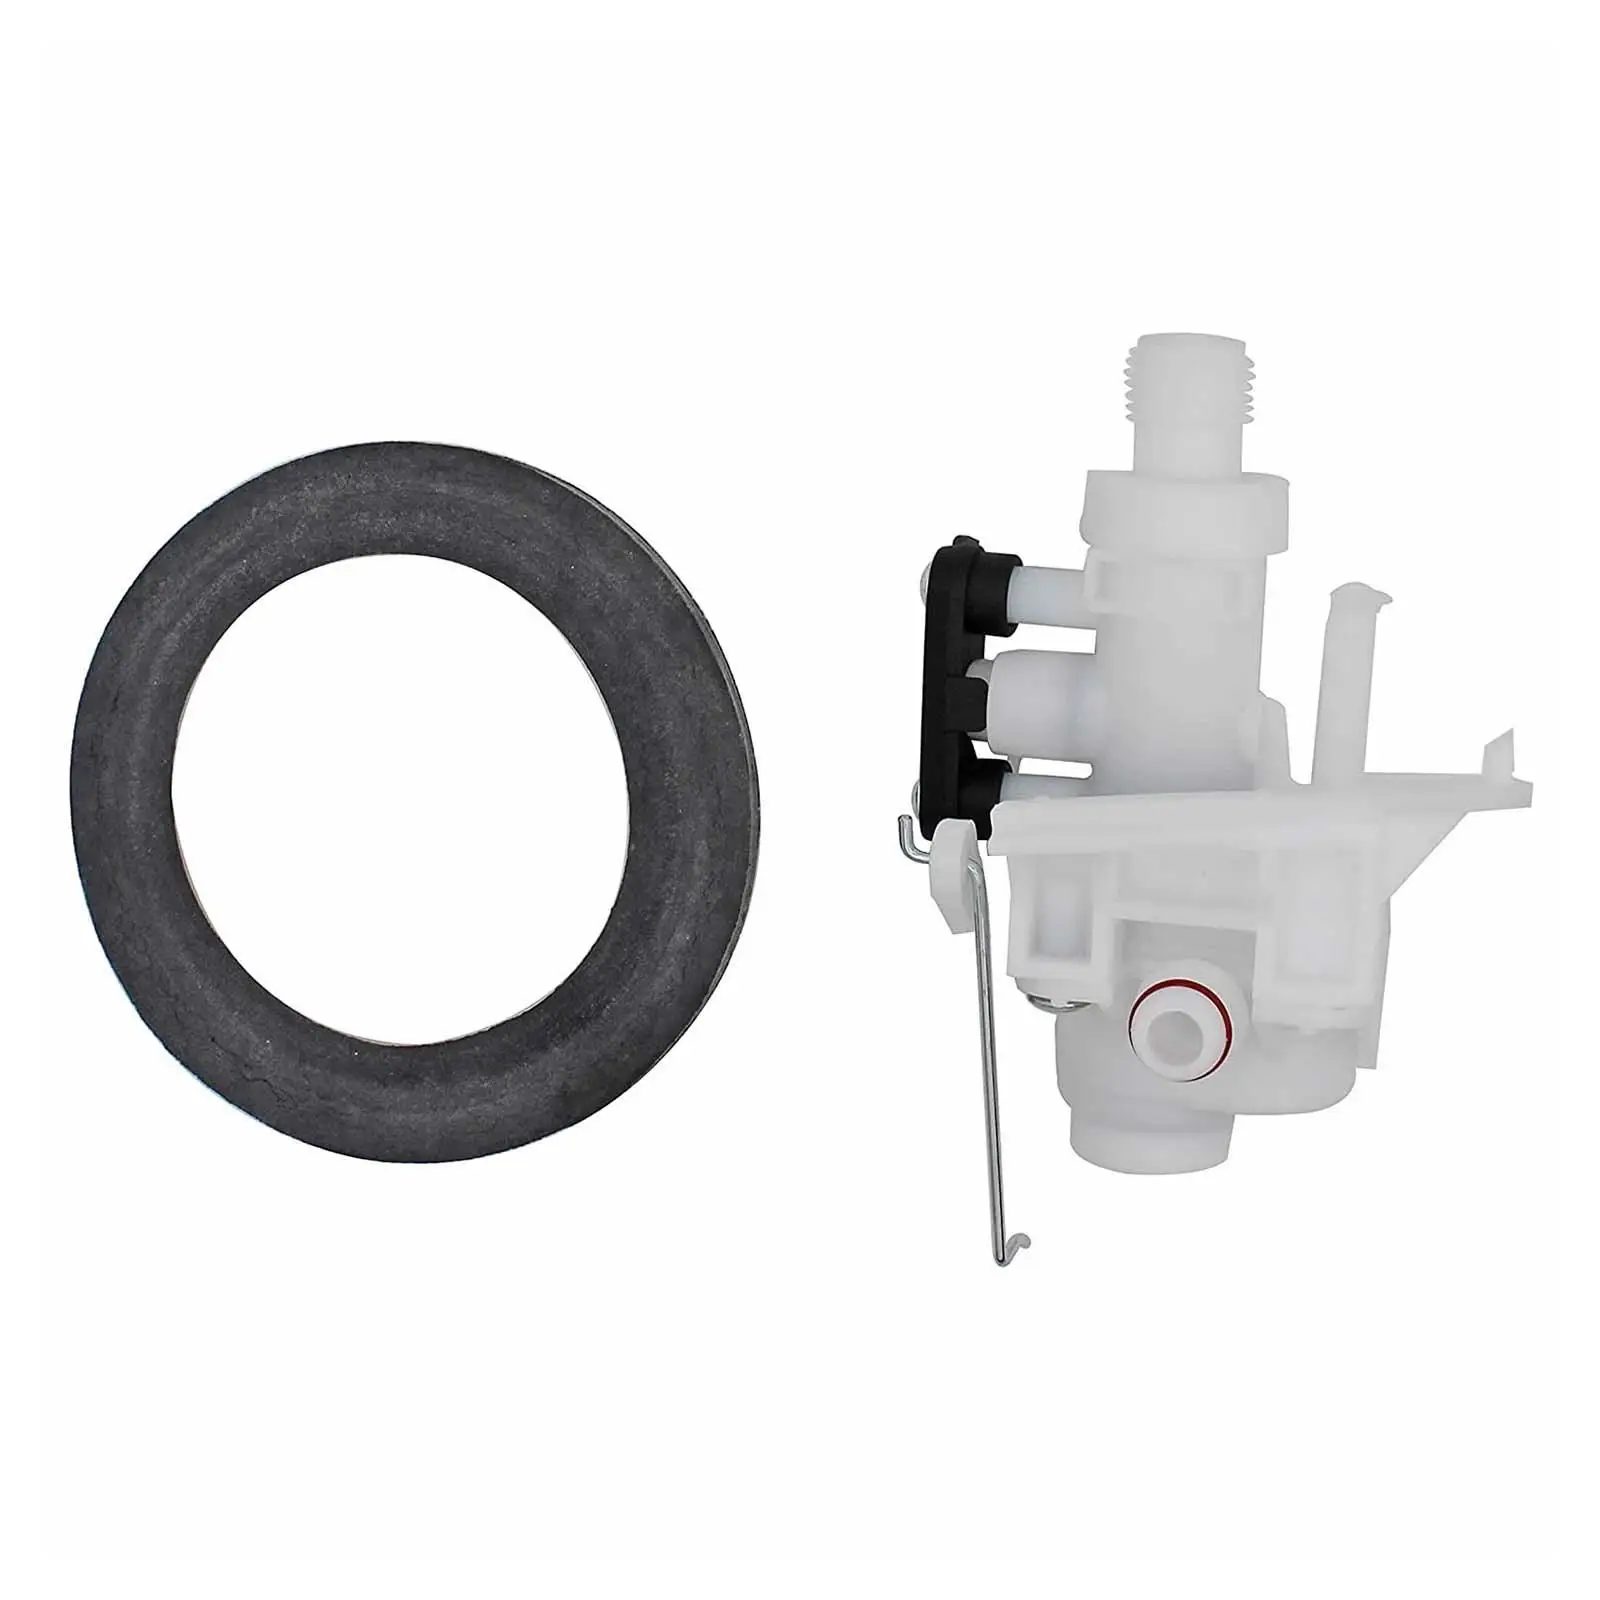 31705 Water Valve with Seal Leak Resistant Convenient RV Toilet Valve with Seal for RV Motor home campers Accessory Replace